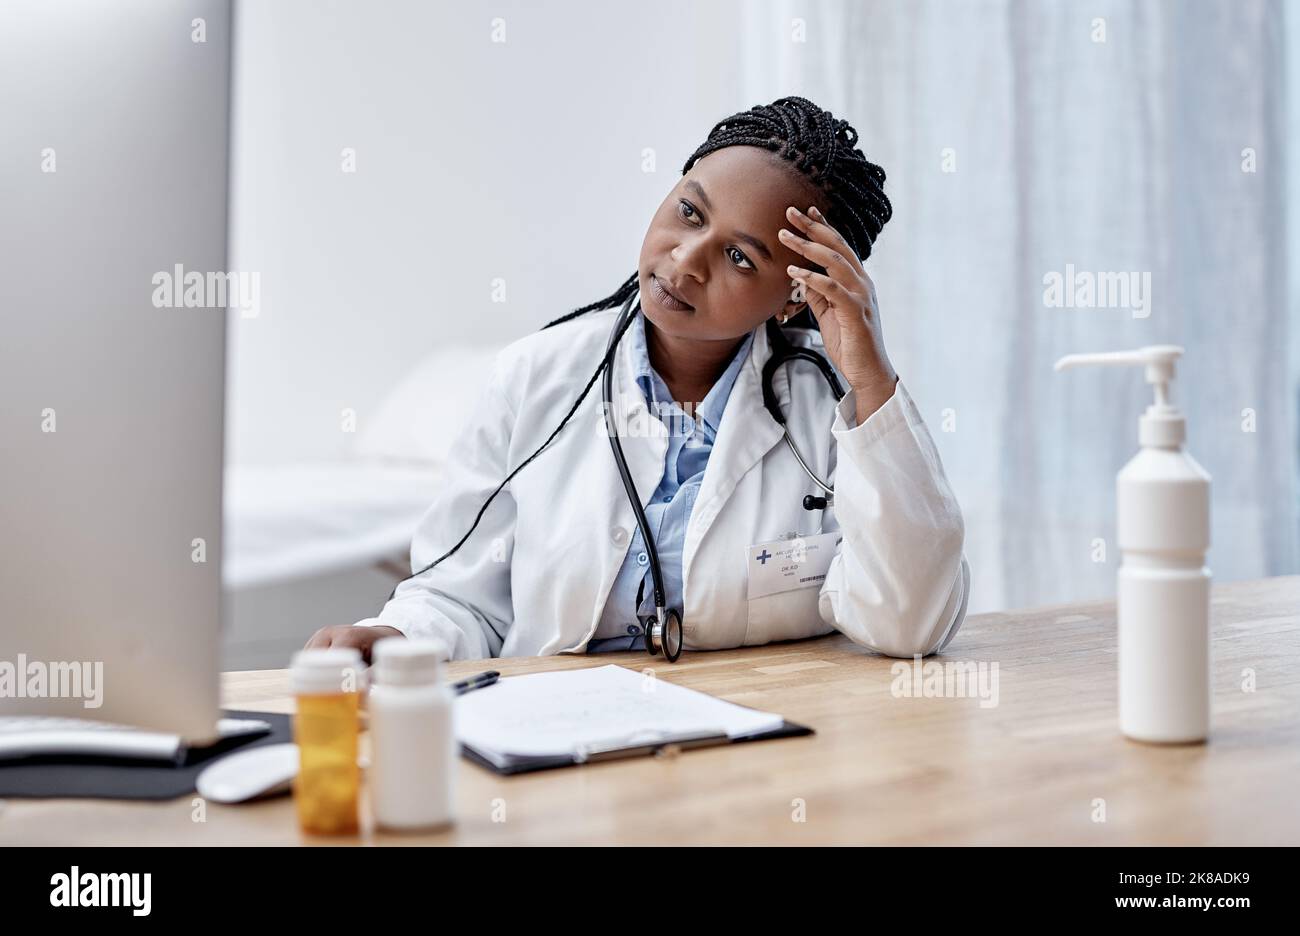 Doctors are humans too. a young doctor looking worried while working on a computer in her office. Stock Photo